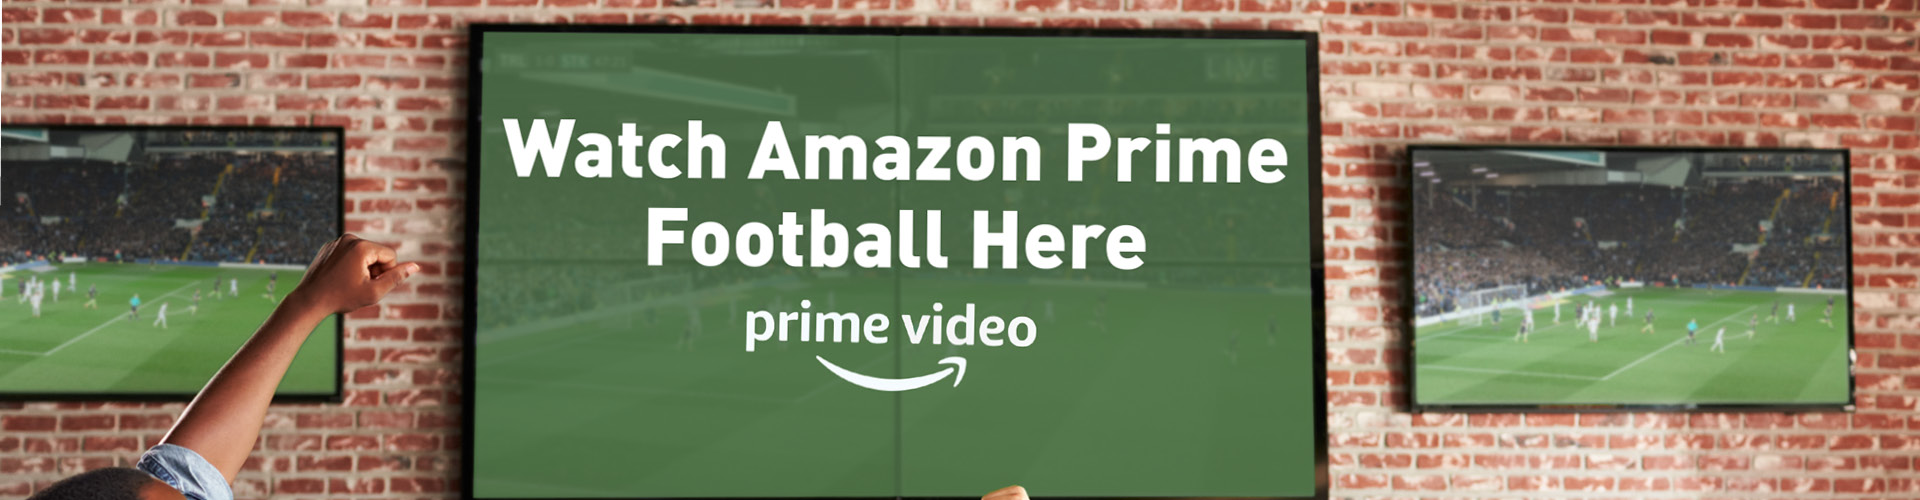 Watch Amazon Prime football at Horse and Trumpet in Leeds